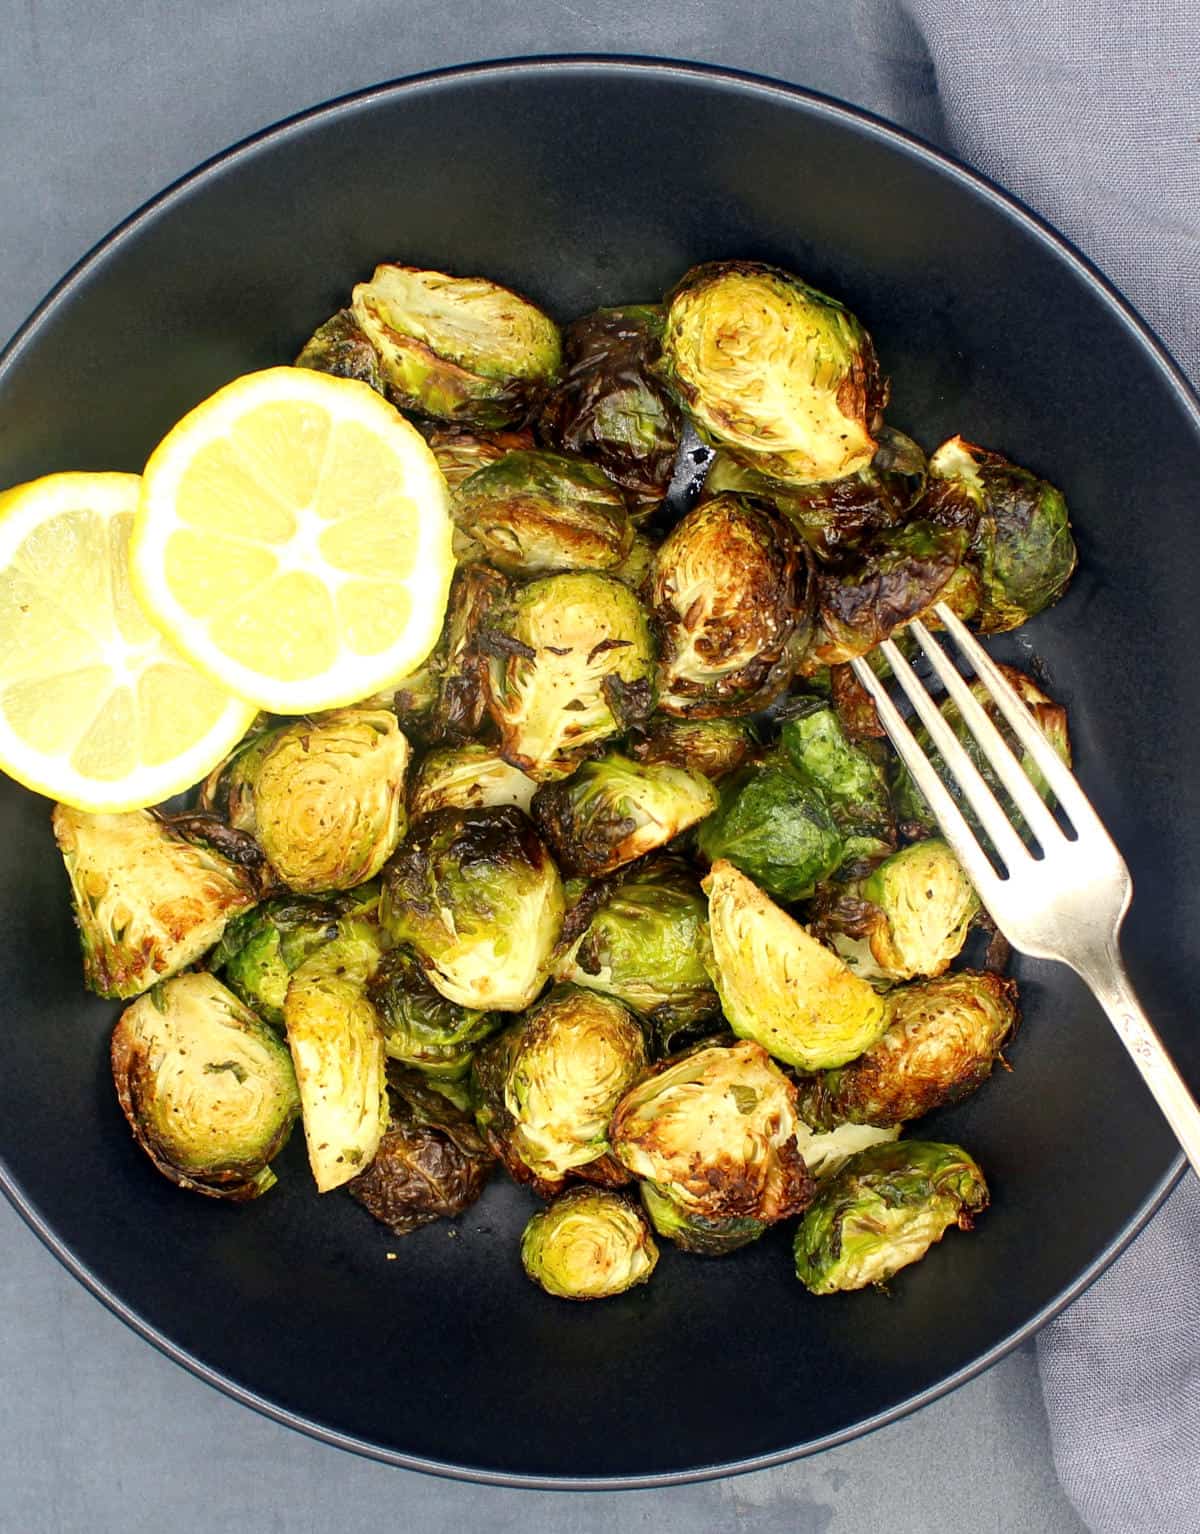 Roasted air fried Brussels sprouts in black bowl with slices of lemon and fork.